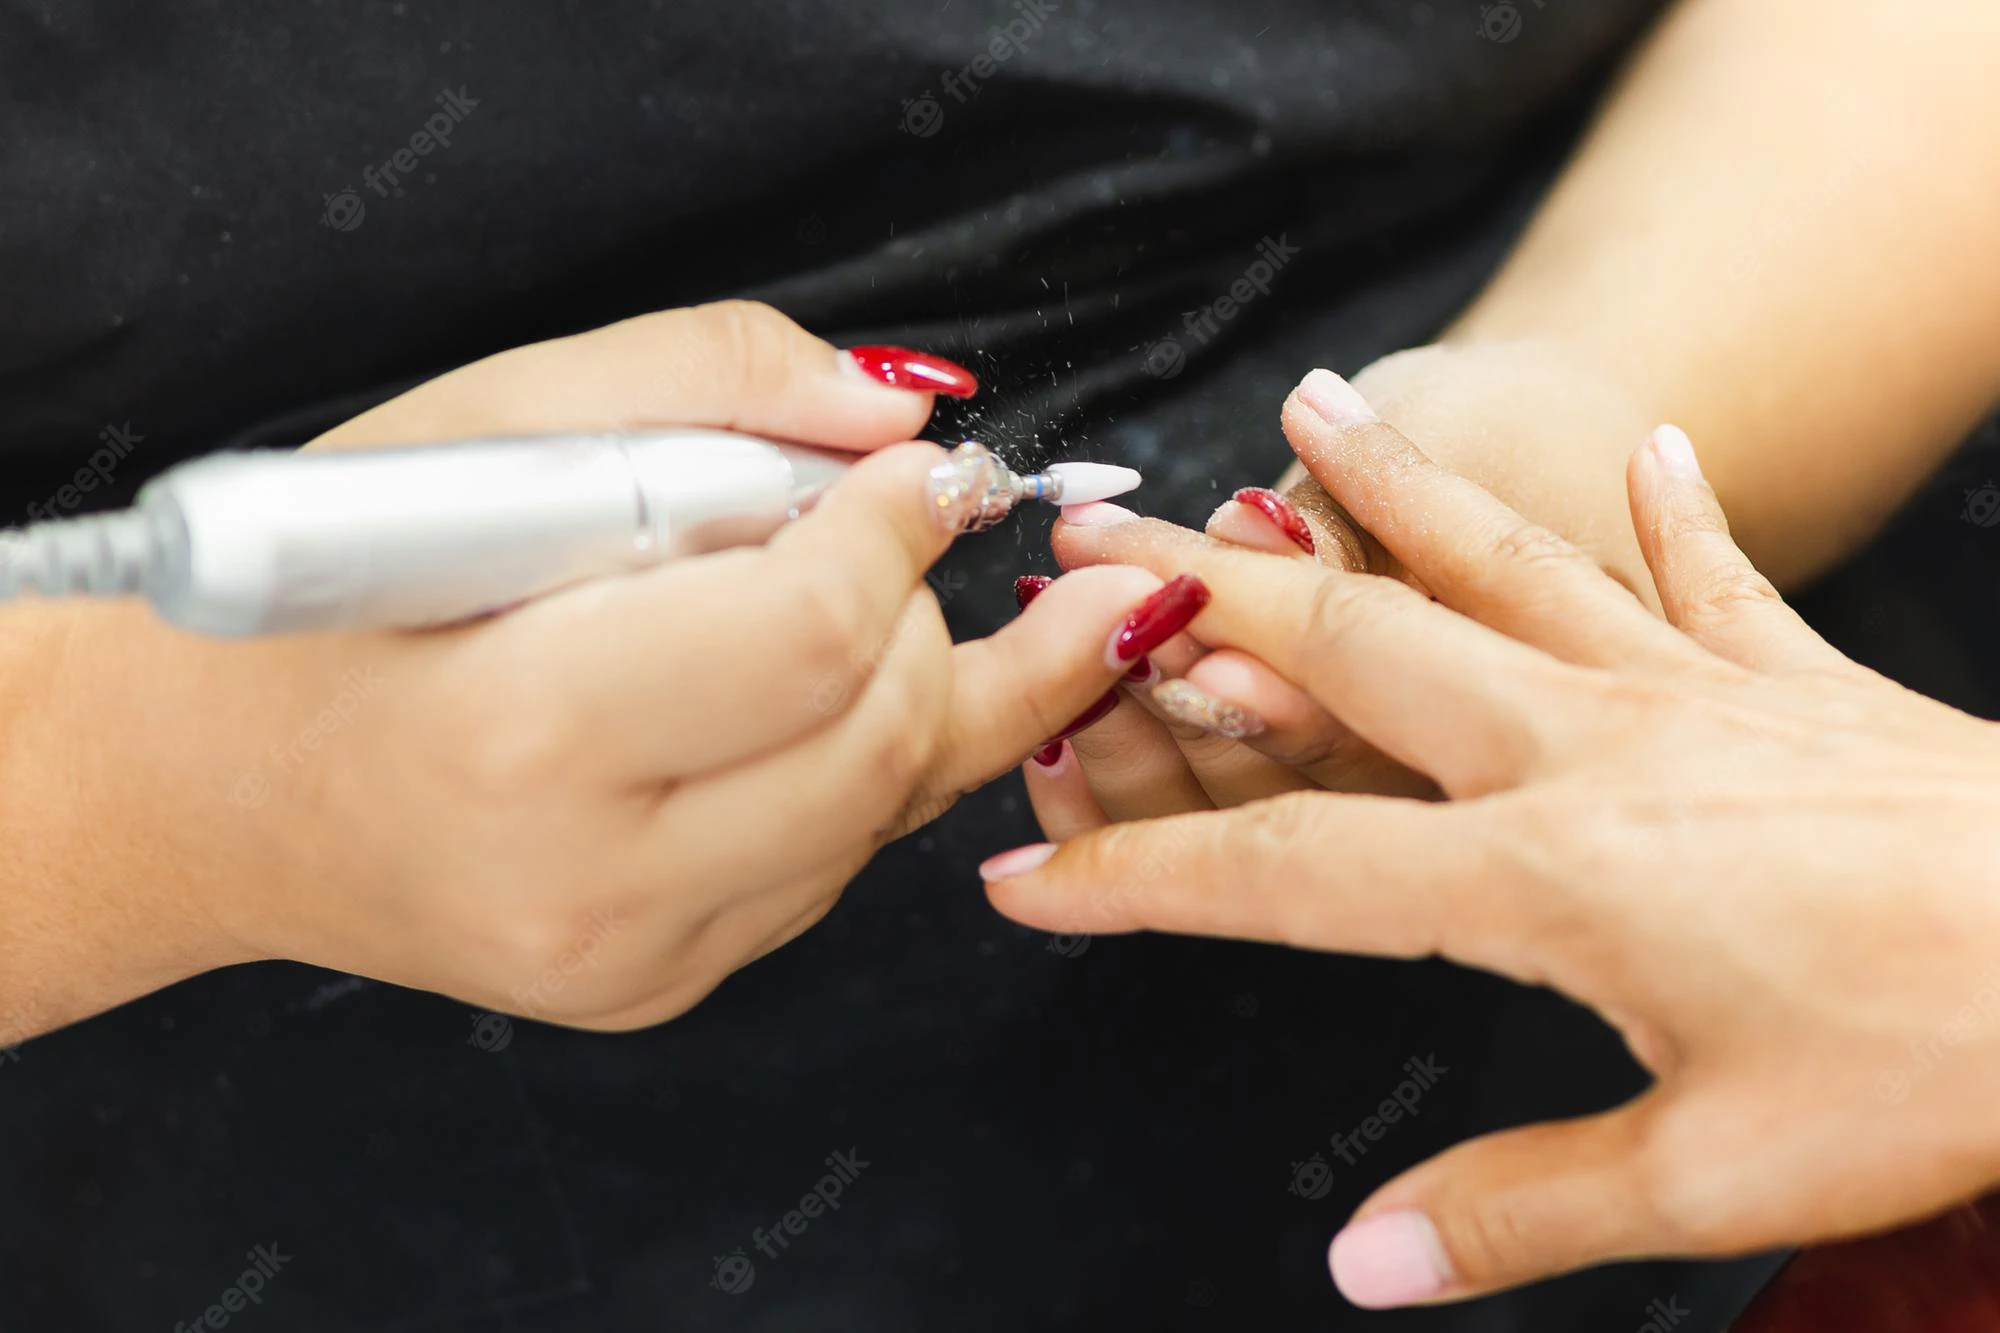 How Are Acrylic Nails Done?